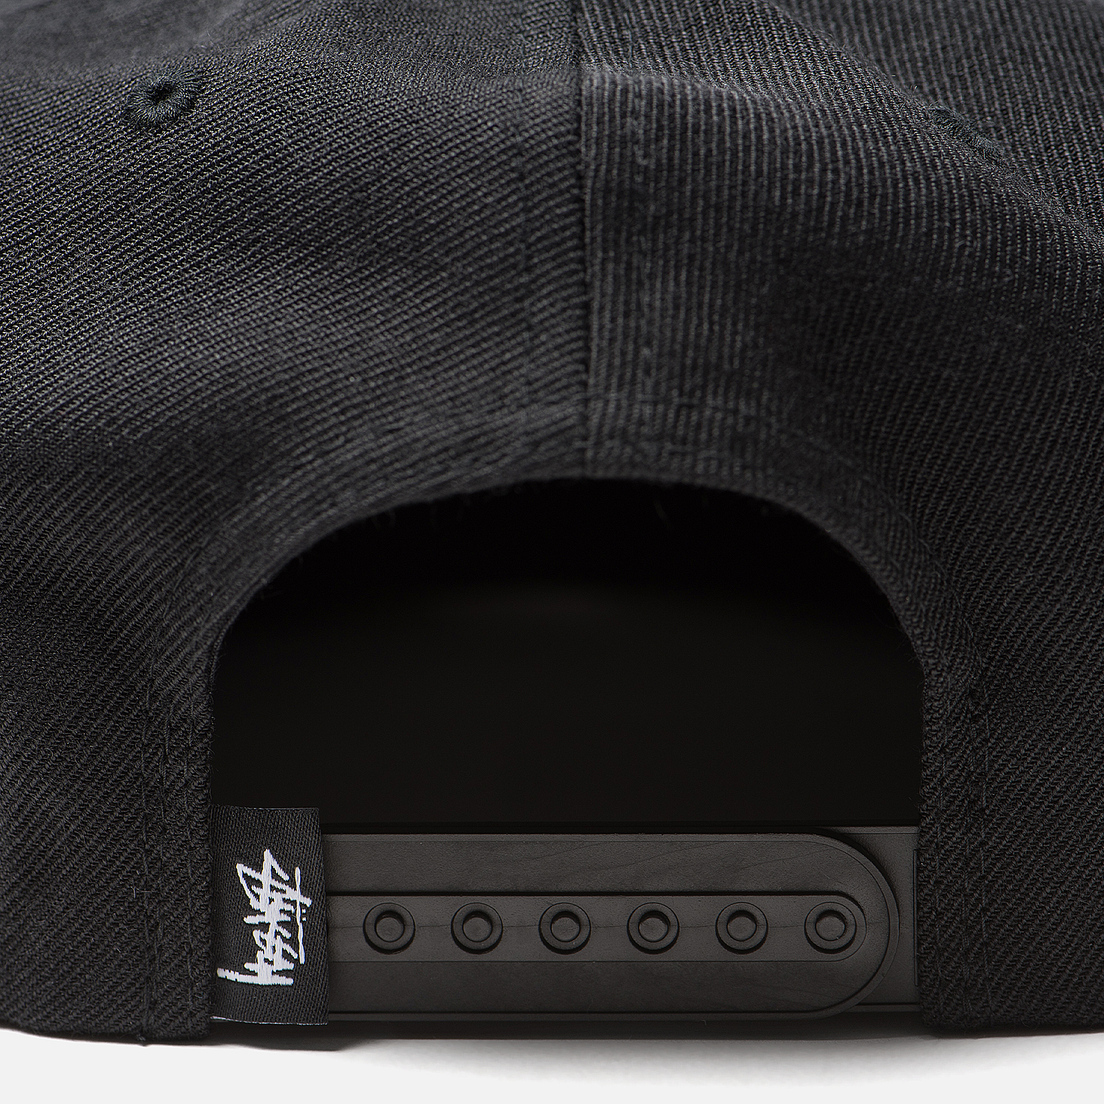 Stussy Кепка Stock 6 Panel Embroidered Logo